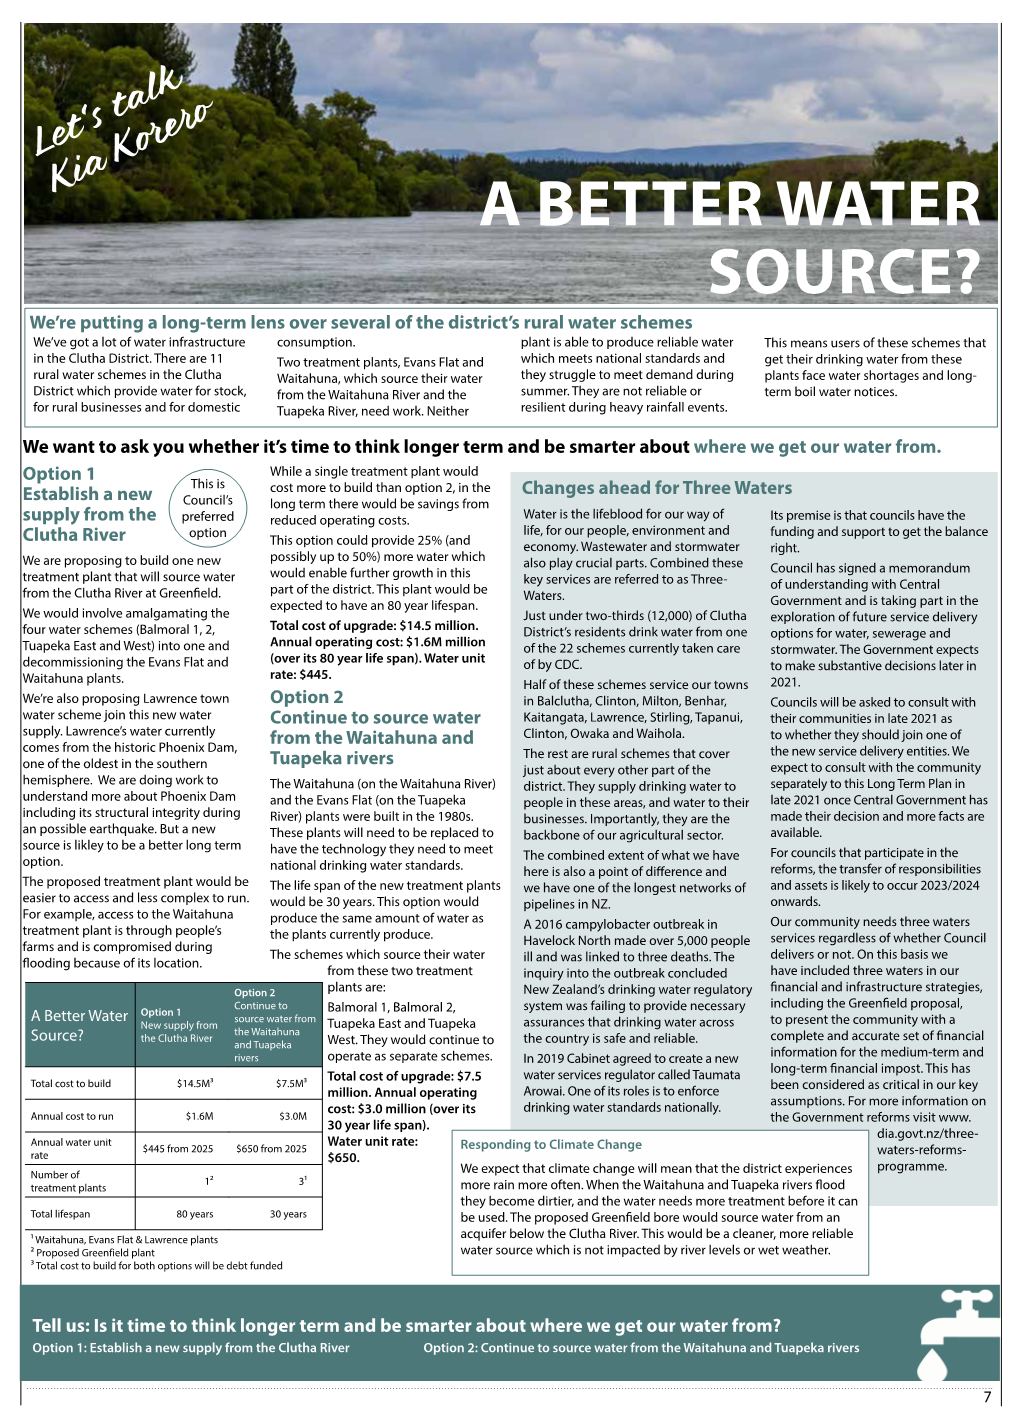 A Better Water Source? from the Consultation Document